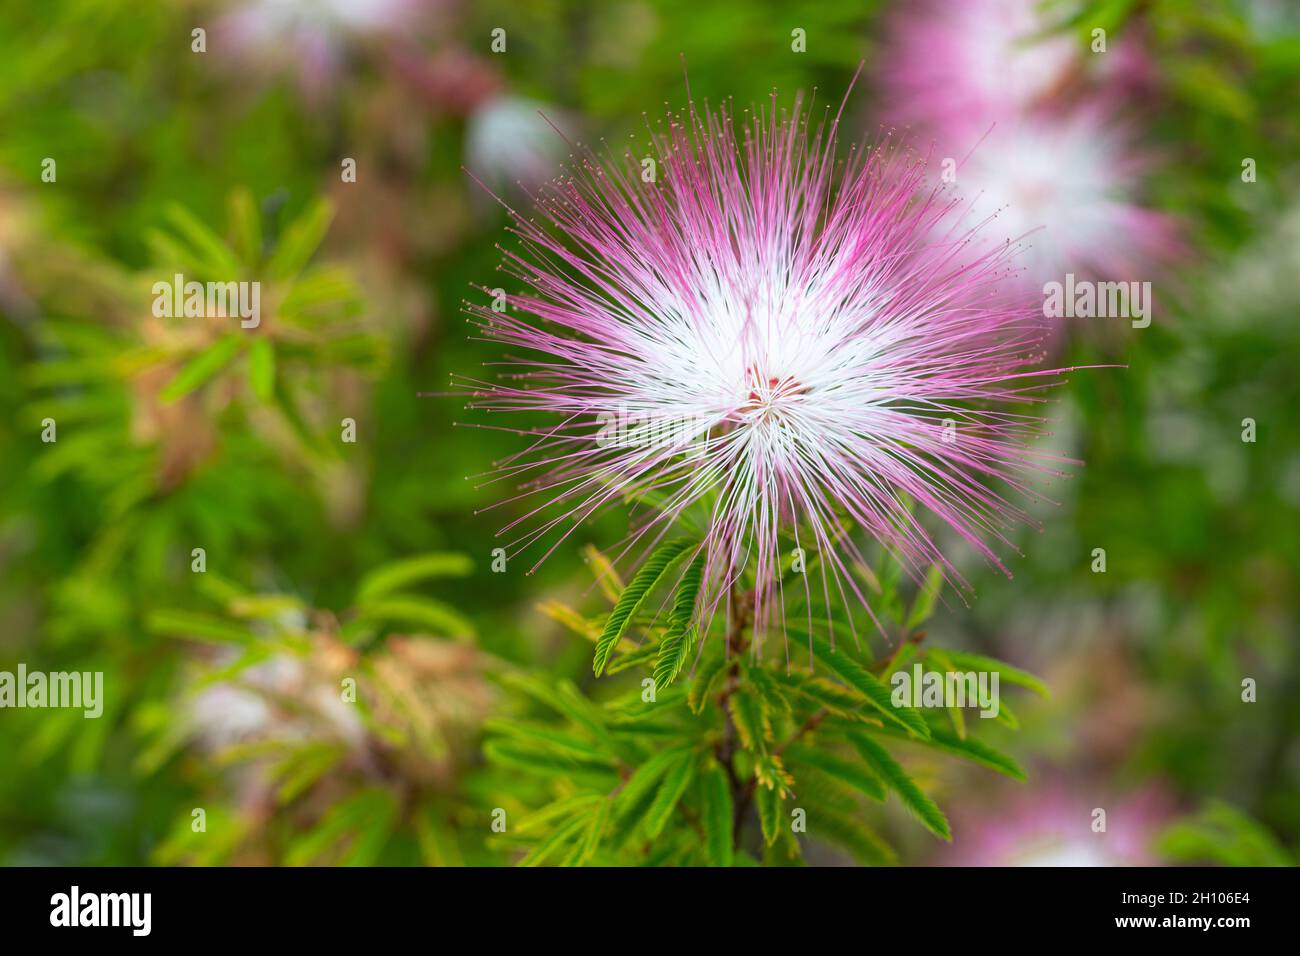 Albizia julibrissin, Persian silk tree or pink silk tree in Hong Kong, which is a species of tree in the family Fabaceae, native to southwestern and e Stock Photo